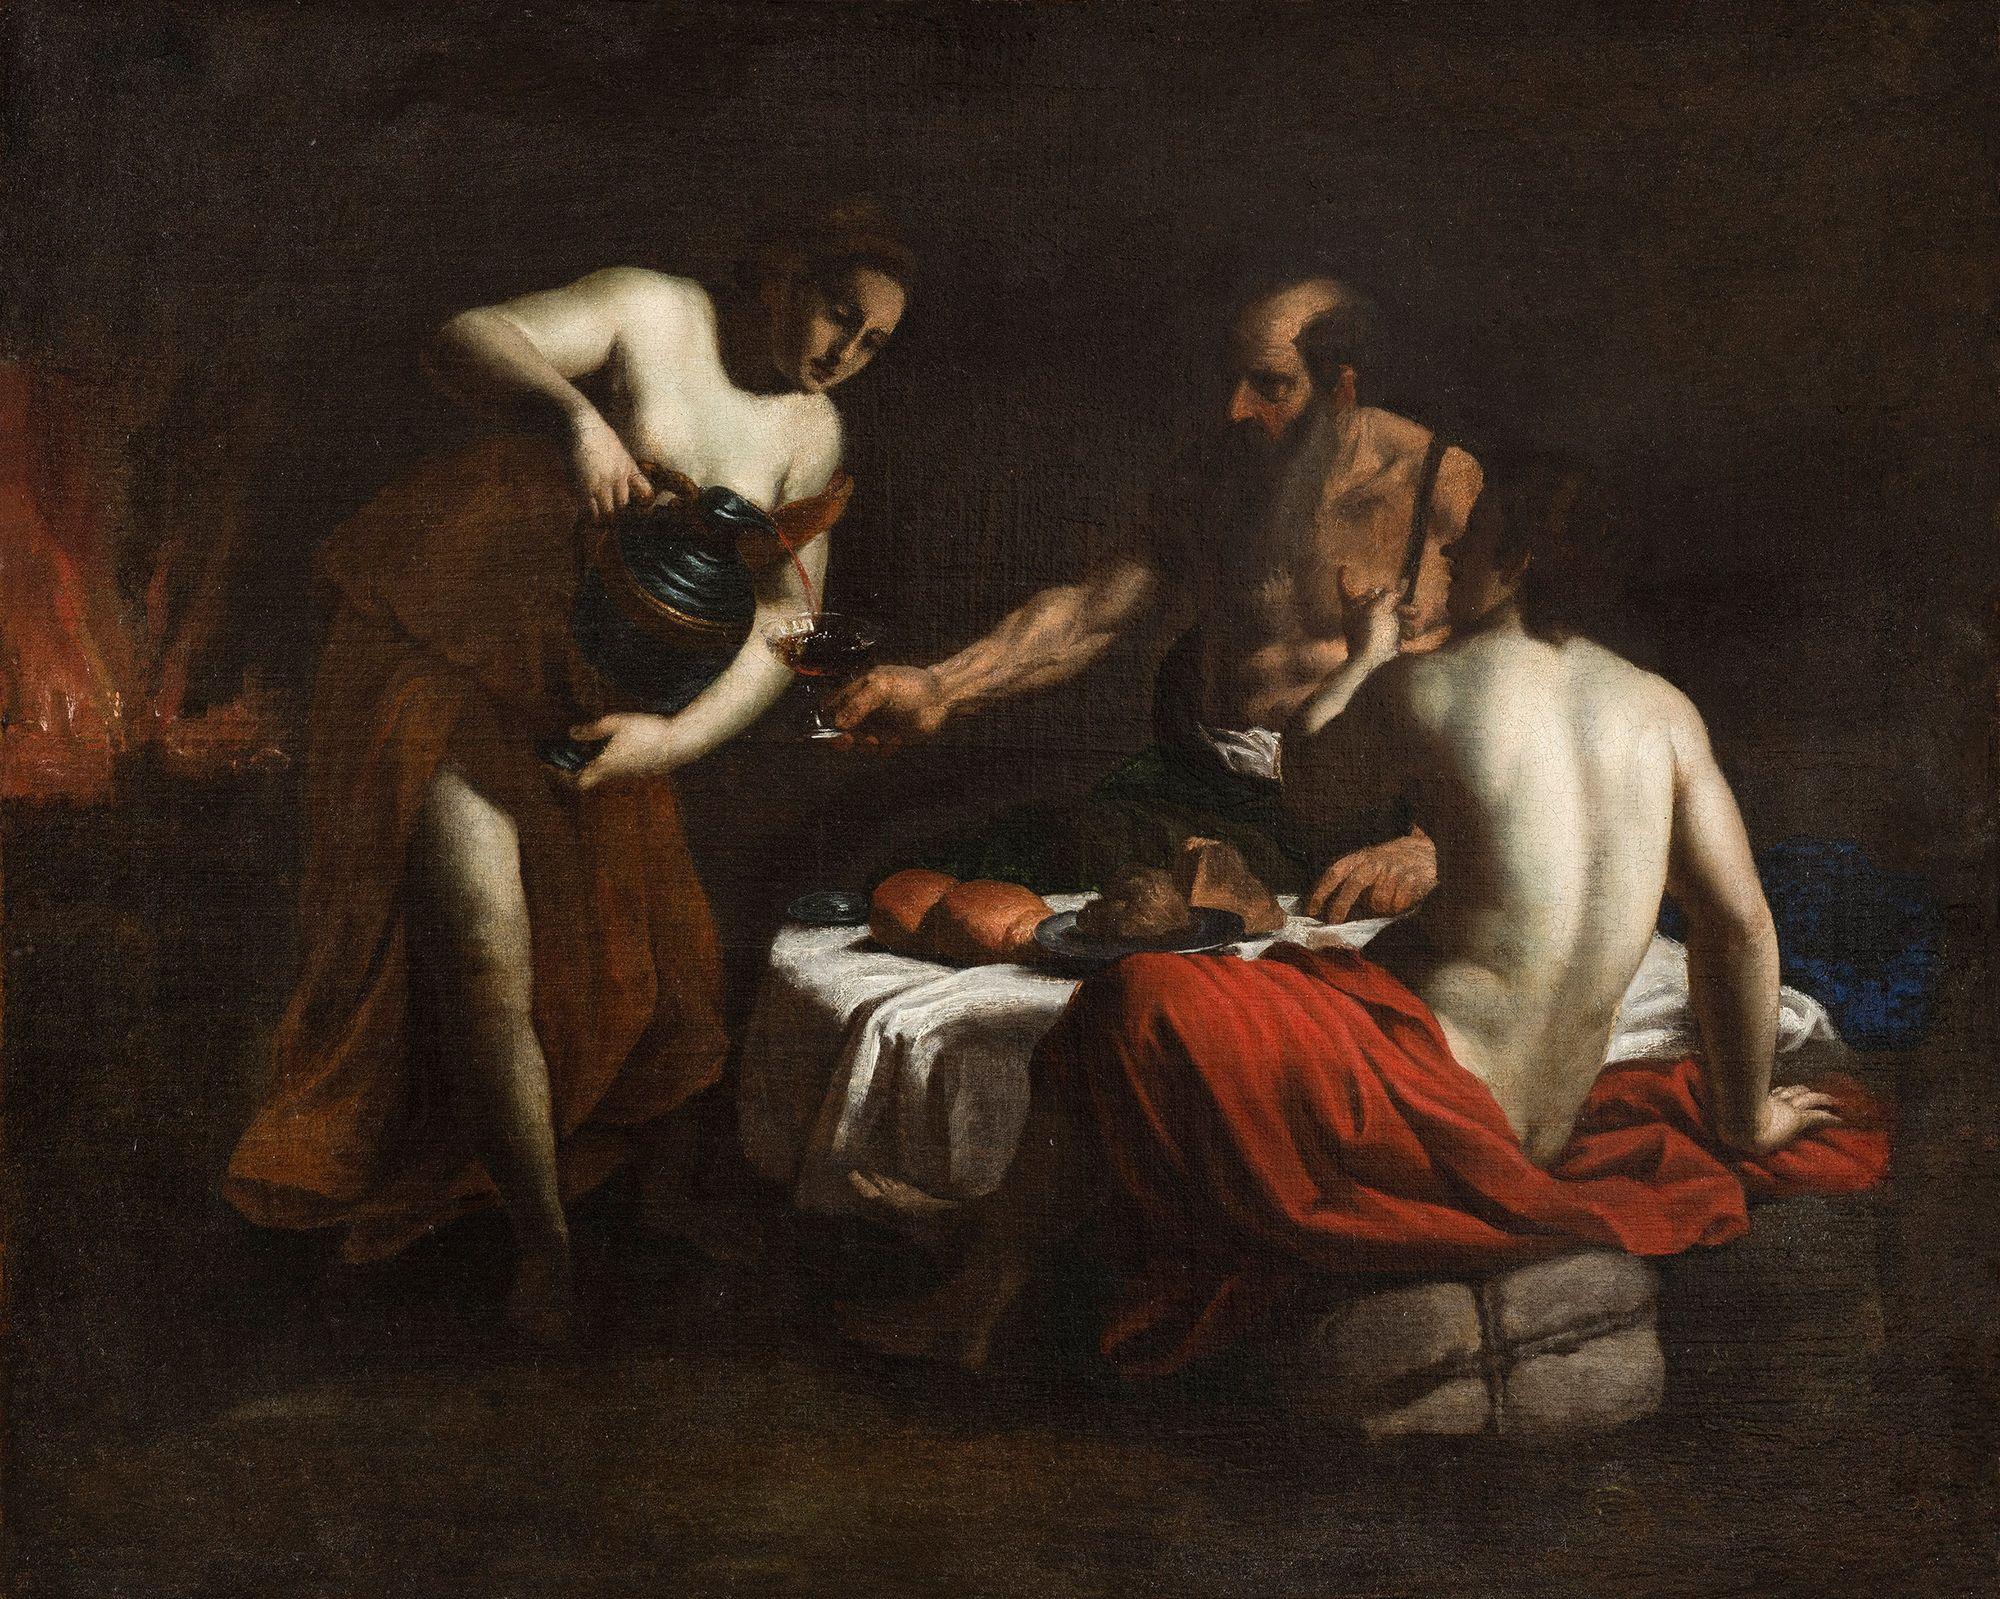 Lot and his daughters - Alessandro Turchi (1578 - 1649) For Sale 1